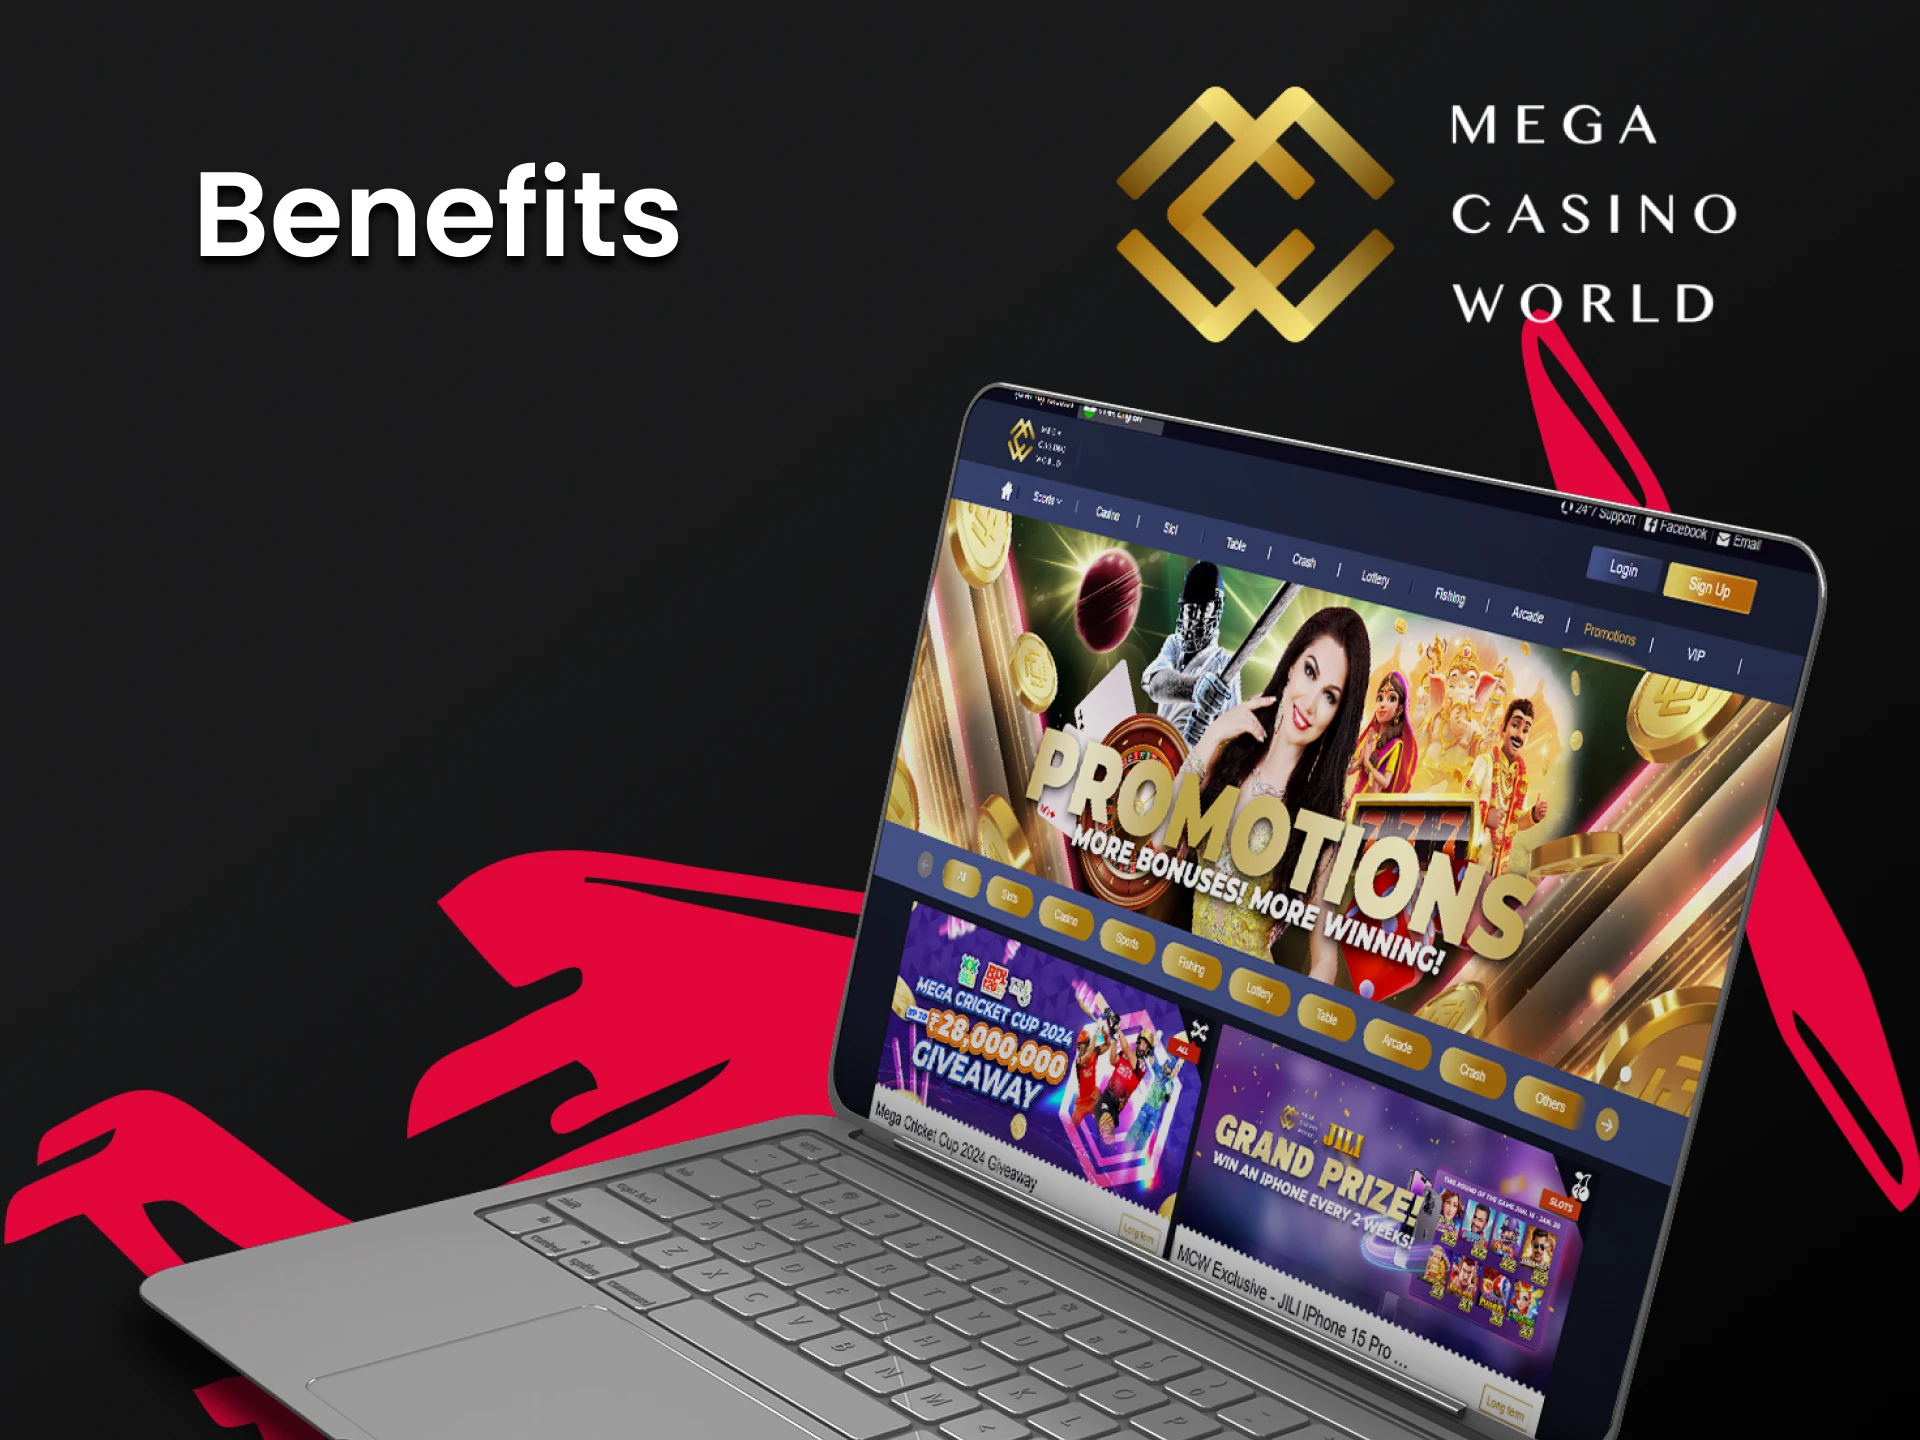 We will tell you the advantages of MCW casino for playing Aviator.